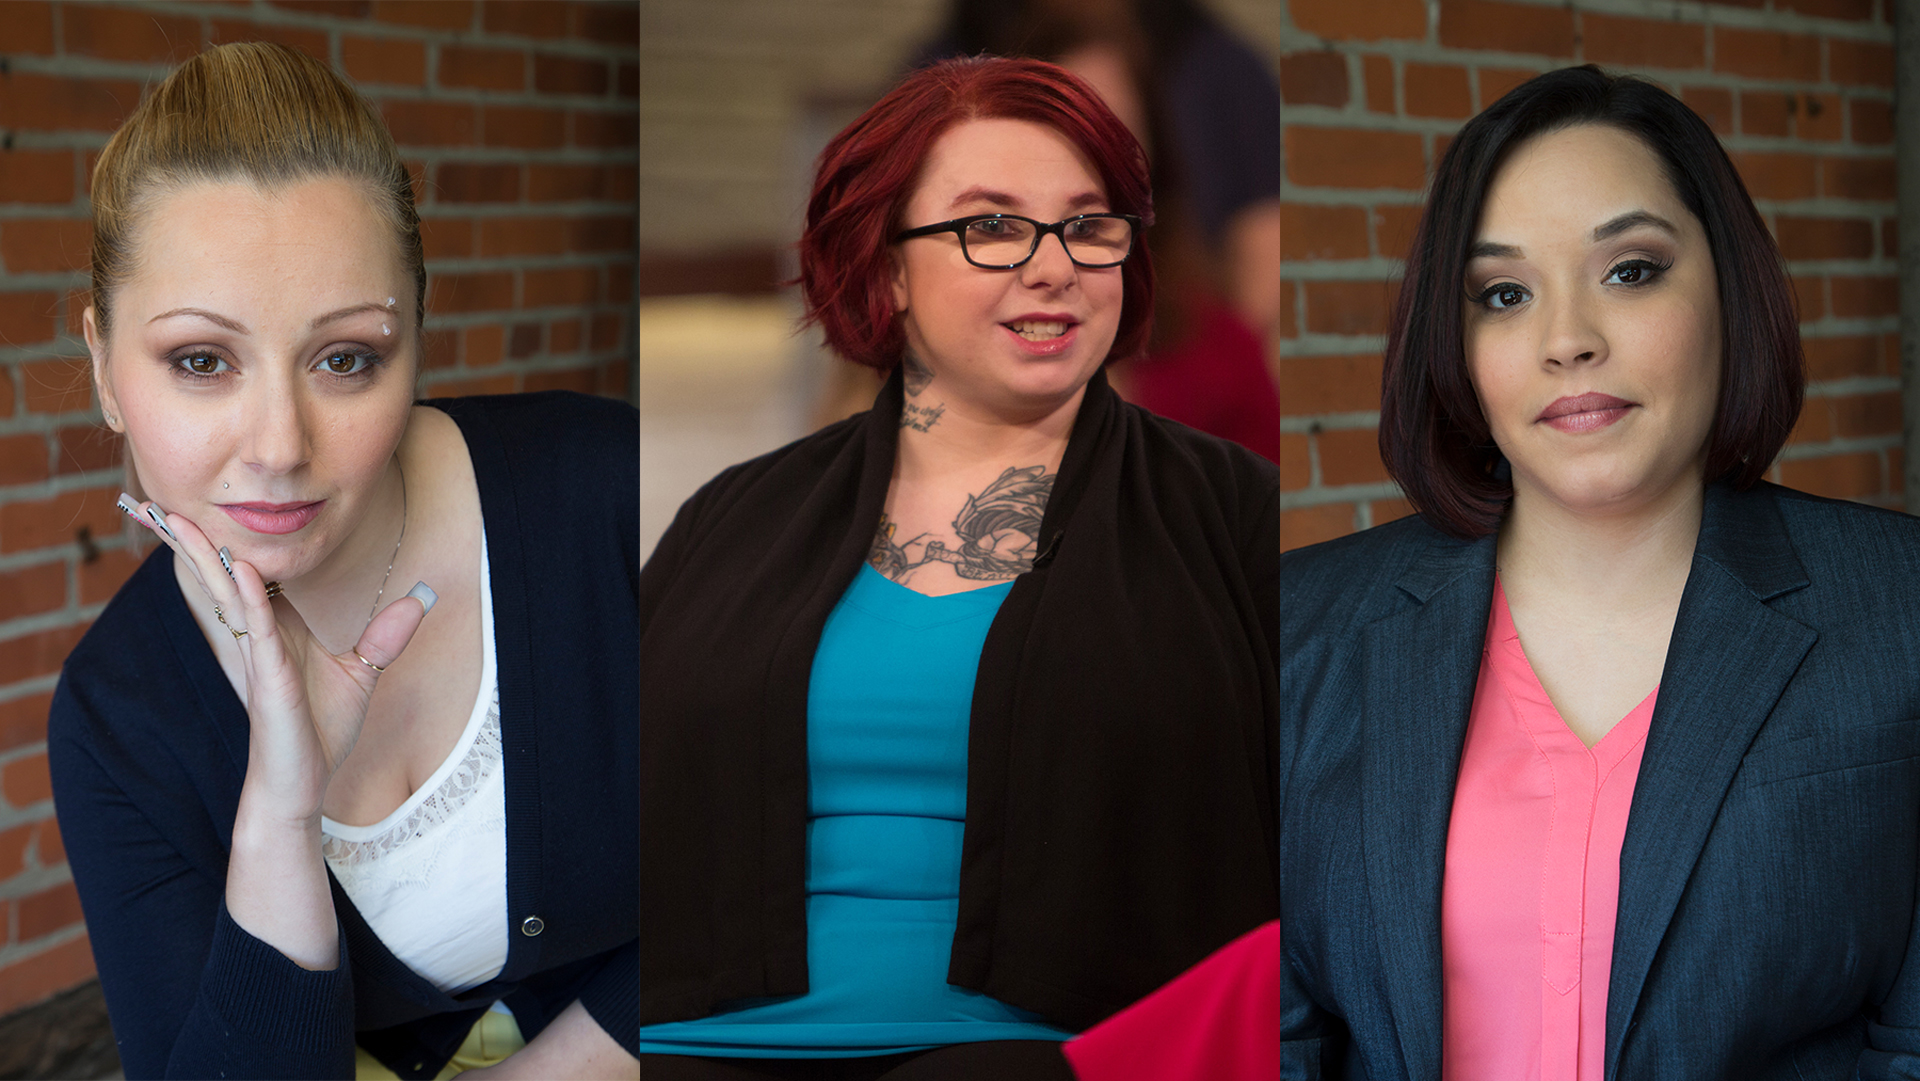 More Than Survivors - Celebrating The Resilience Of Gina DeJesus, Amanda Berry, And Michelle Knight